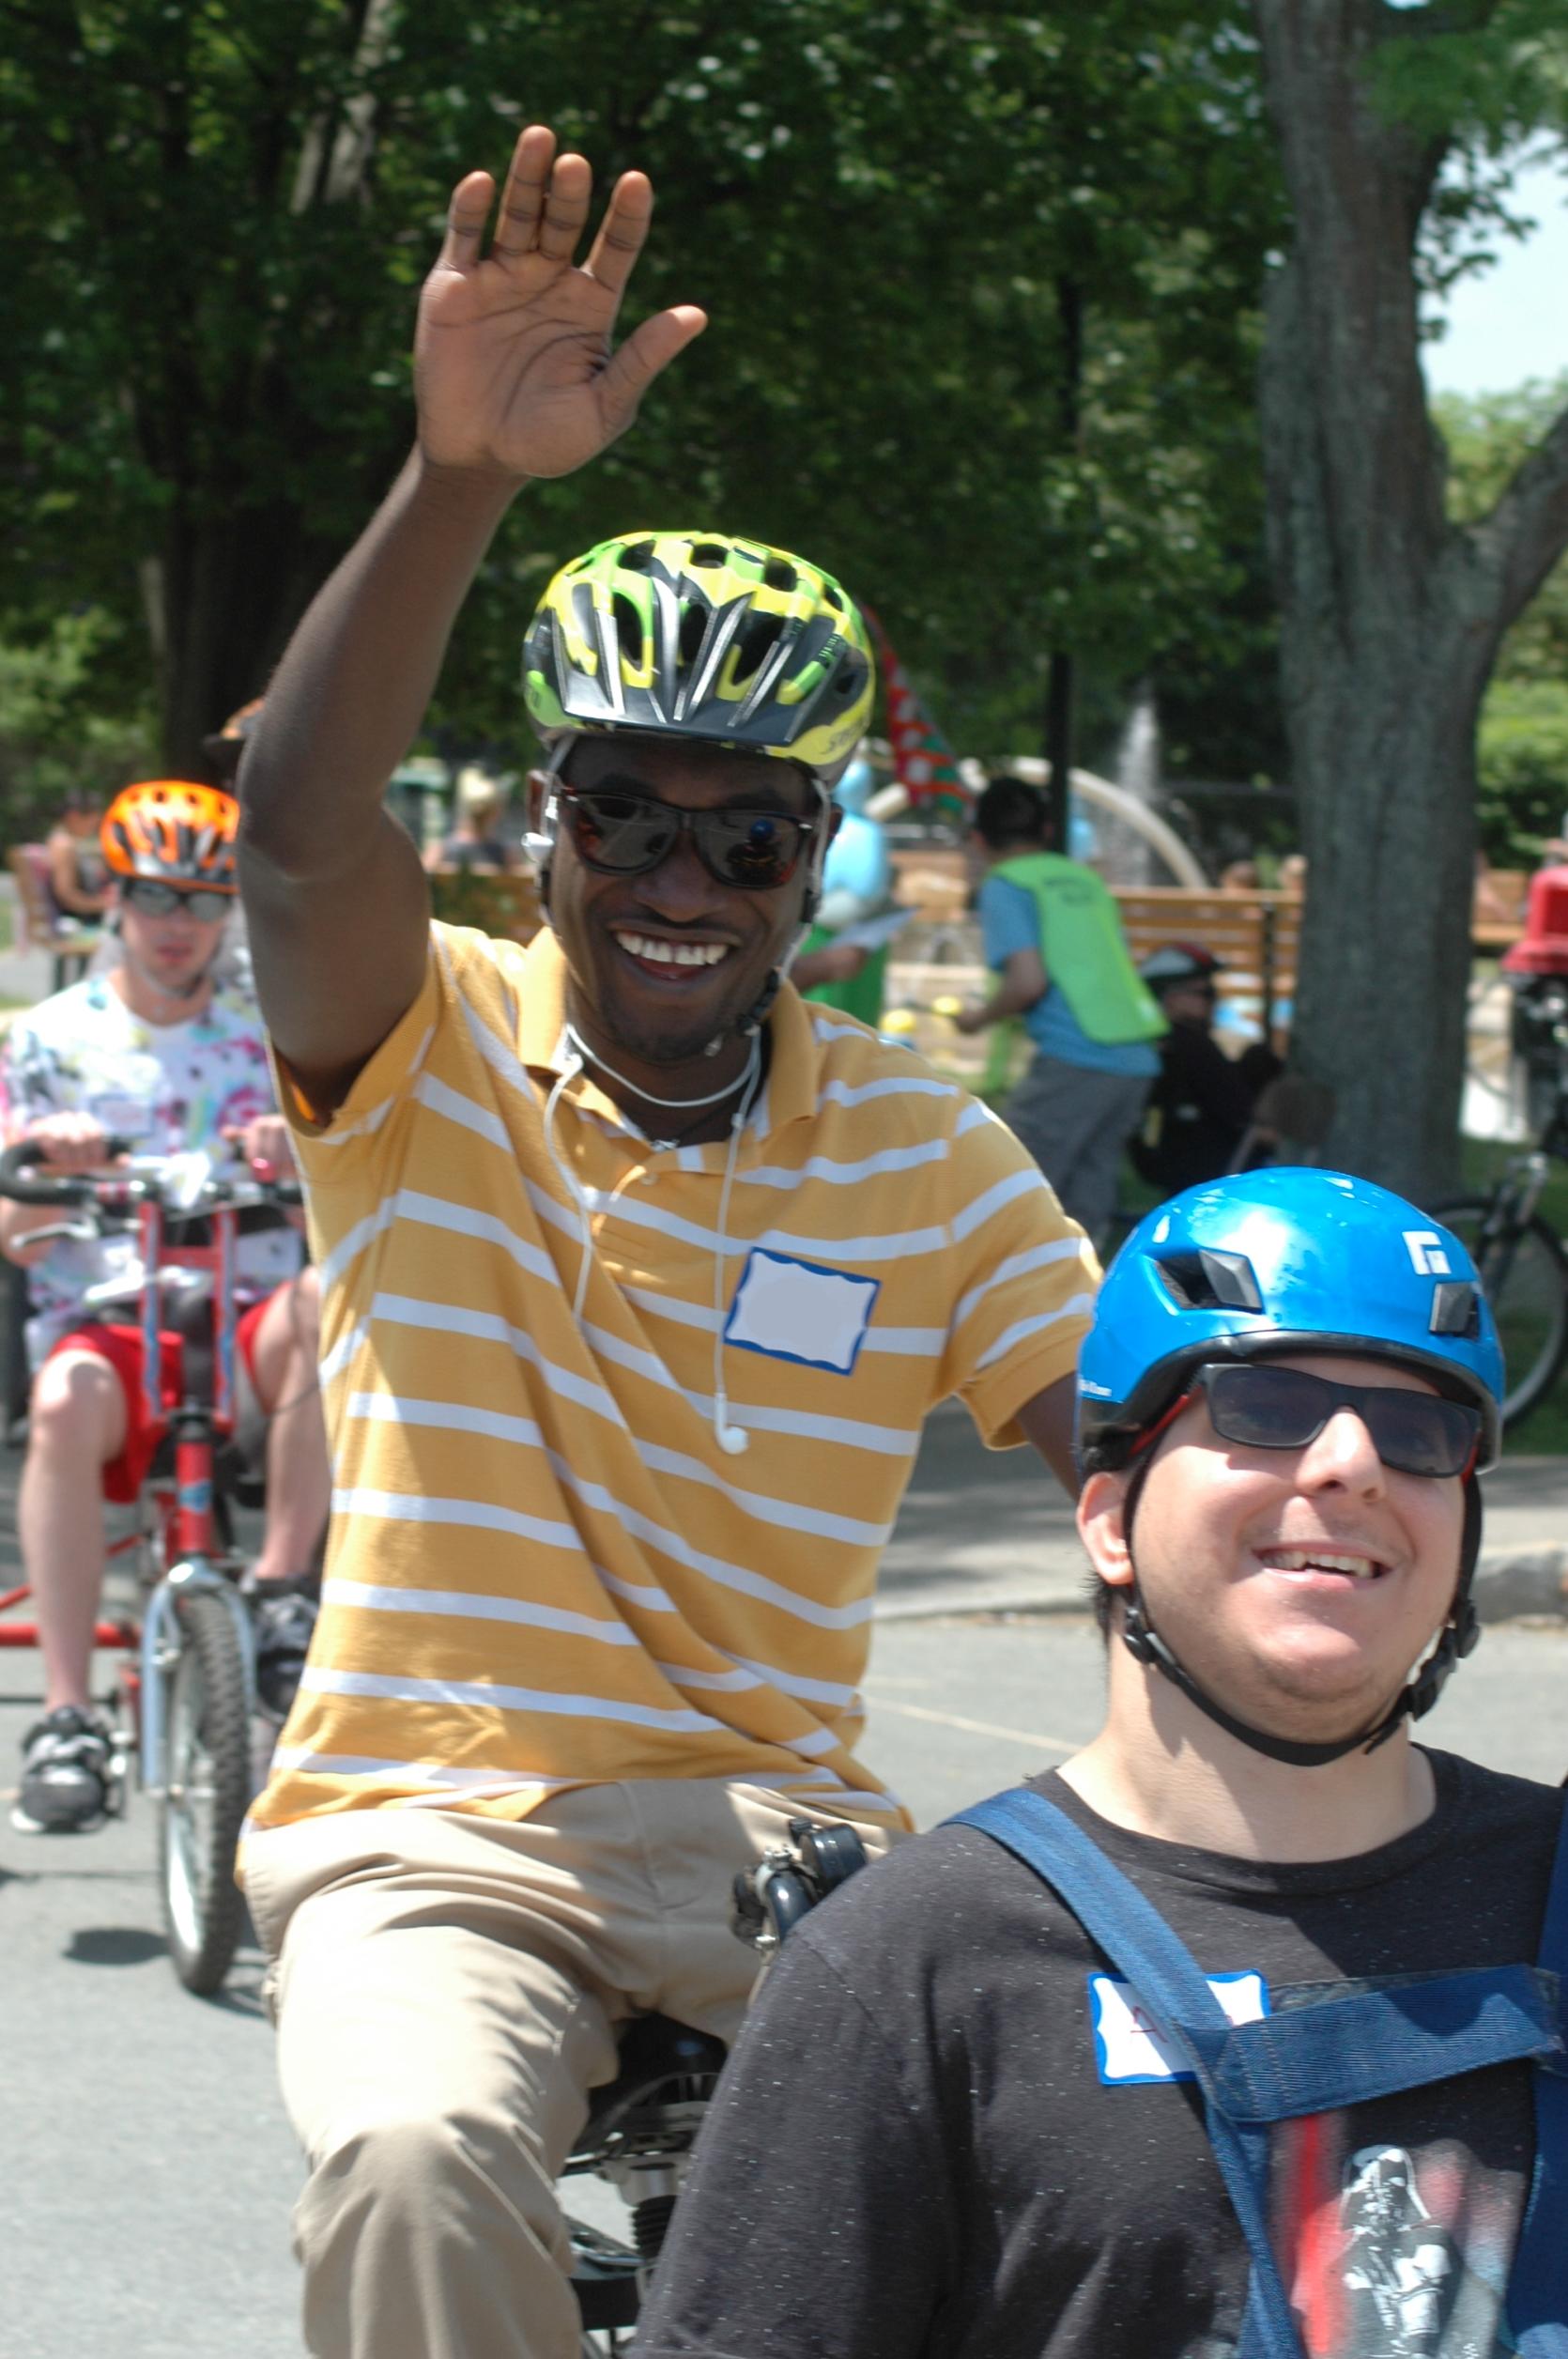 Two smiling cyclists ride by on a tandem cycle and wave at the camera. More cyclists are visible behind them.